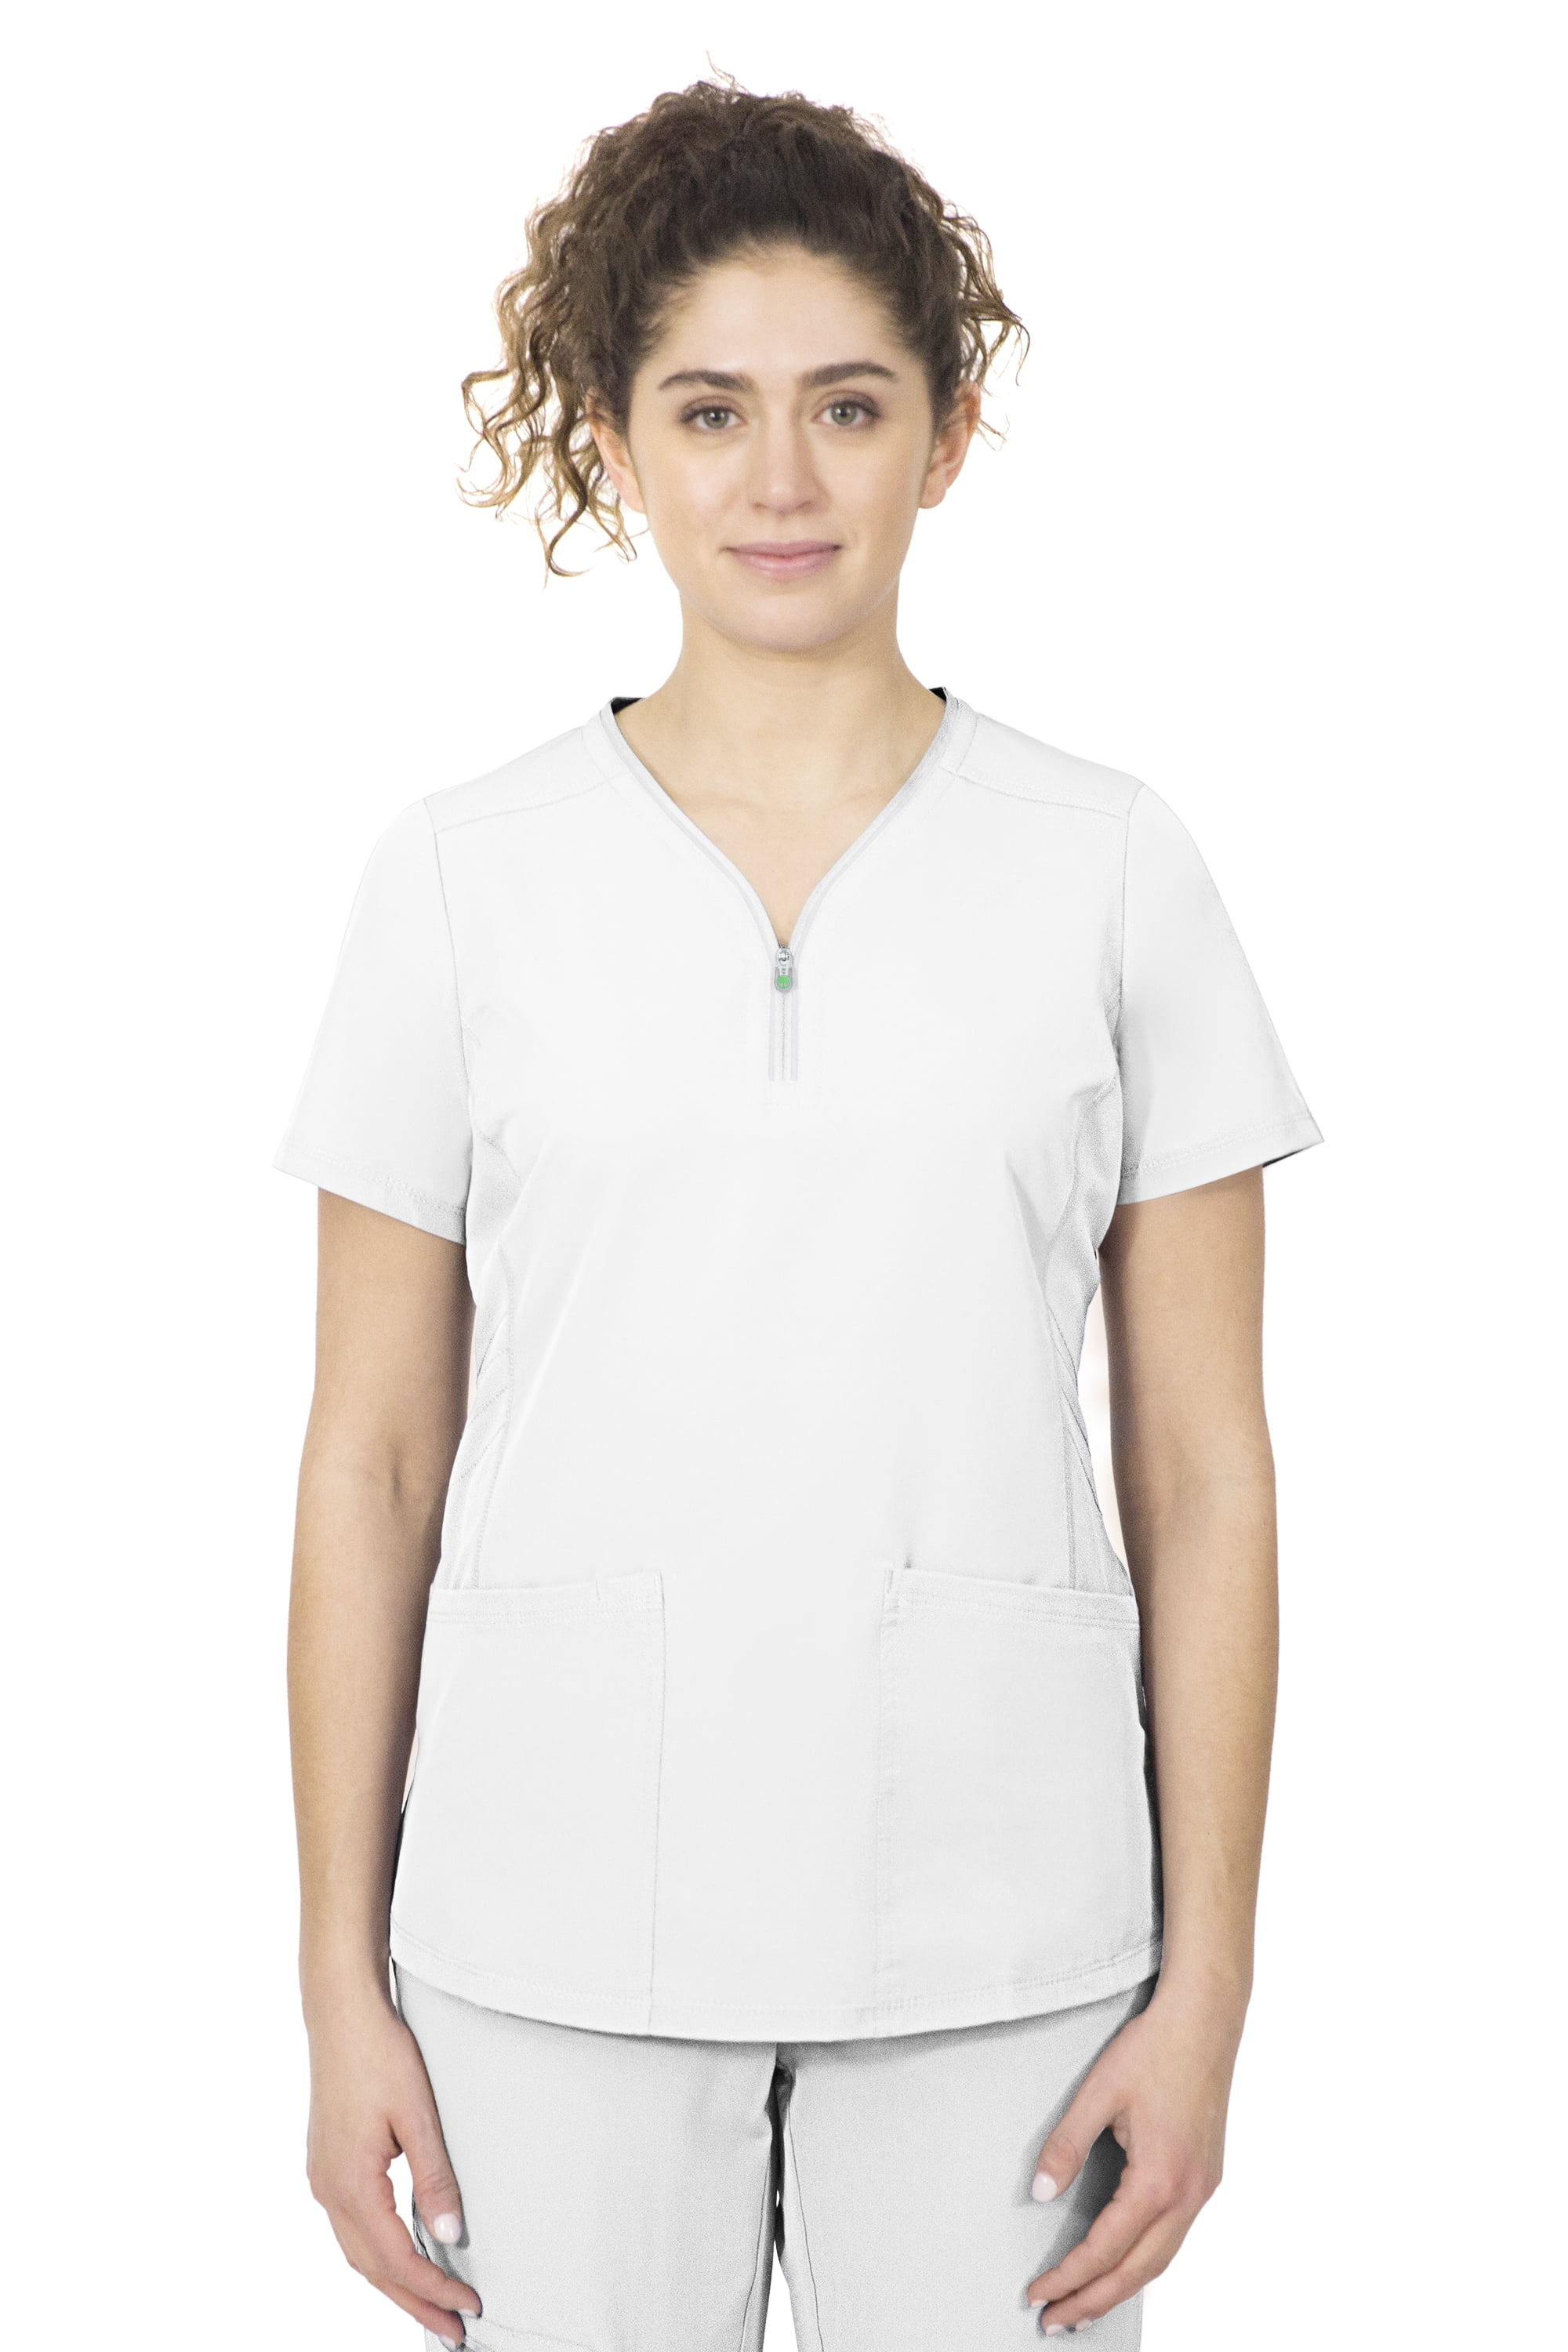 HH360 by Healing Hands "Sonia" Y-Neck Performance Scrub Top 